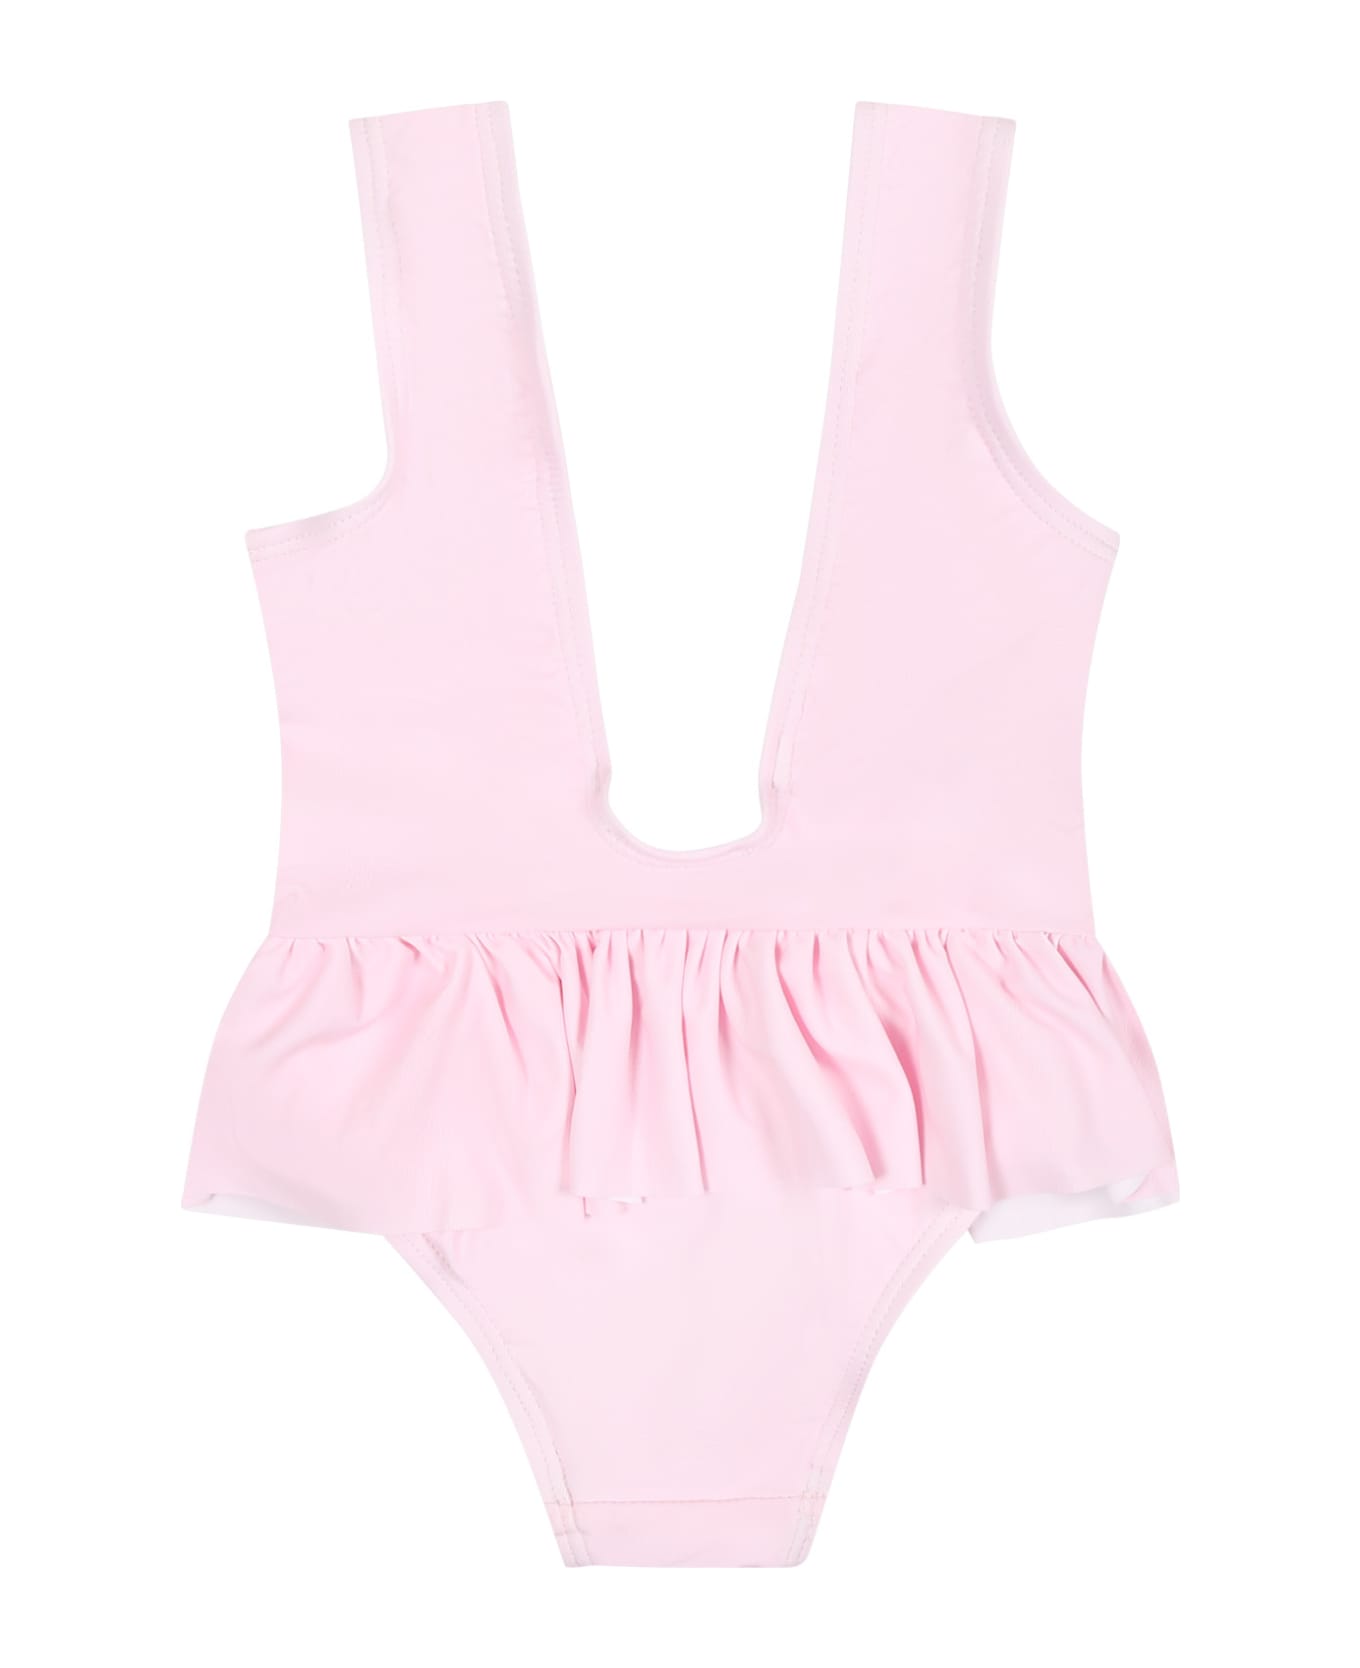 Chiara Ferragni Pink Swimsuit For Baby Girl With Ruffles And Flowers - Pink 水着